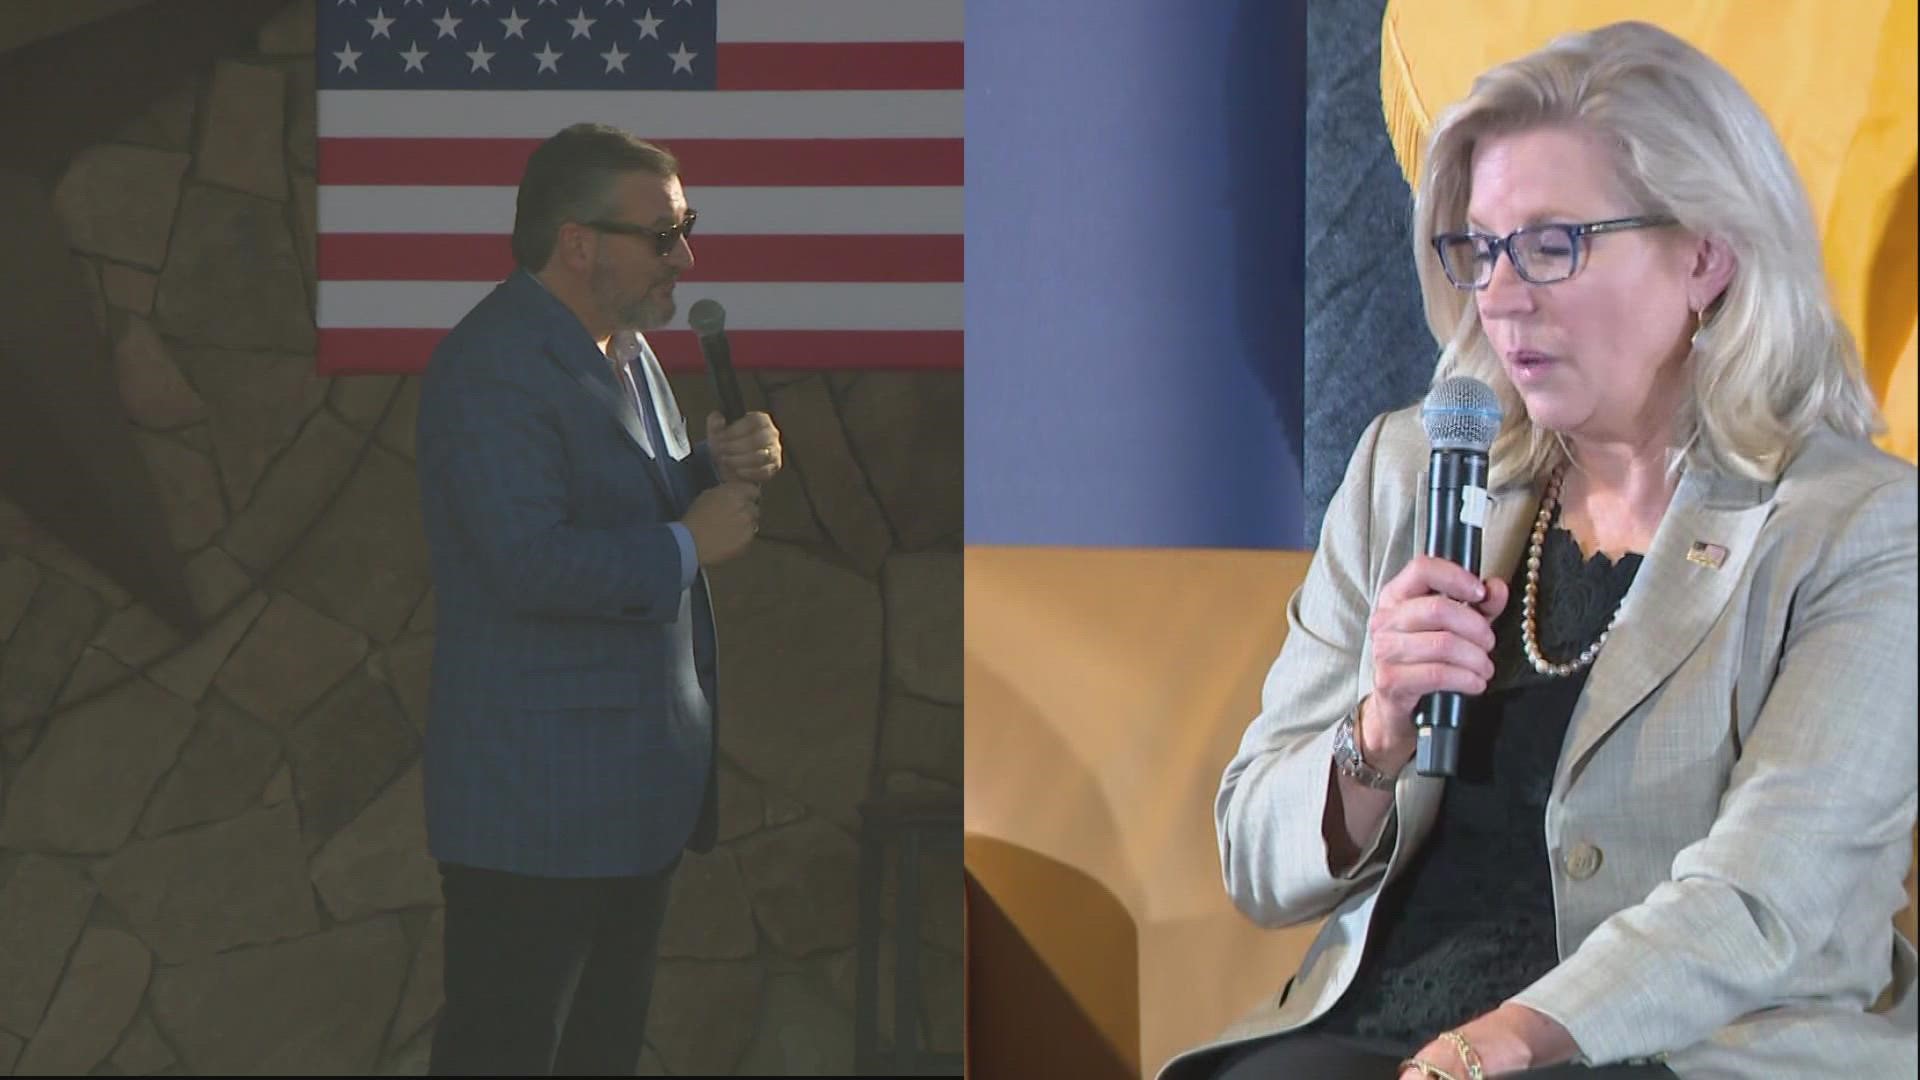 Texas Senator Ted Cruz and Wyoming Congresswoman Liz Cheney were in the Grand Canyon State ahead of the November election.